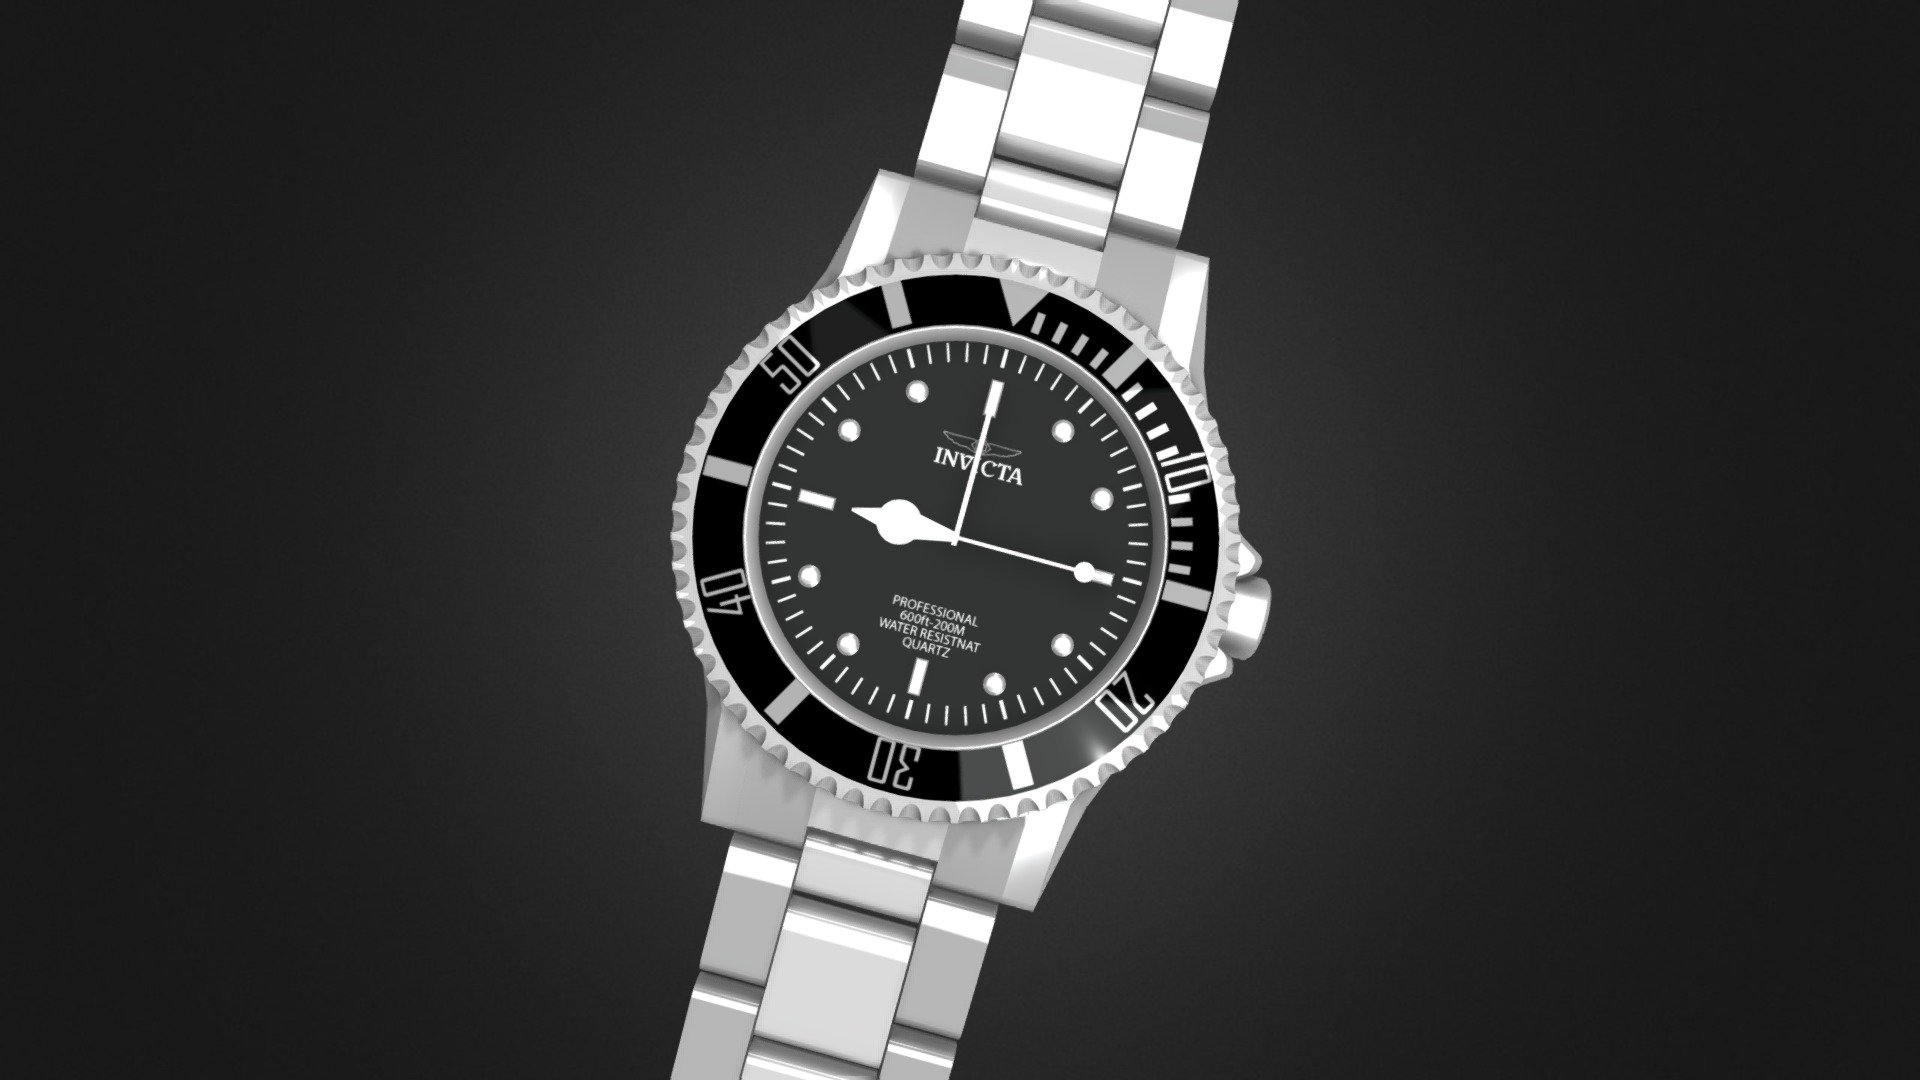 Made in blender. Real scale.

Re-uploaded on March 22, 2021

Buy Me a Coffee - Invicta Watch - Download Free 3D model by Víctor Hernández (@victorhugohc) 3d model